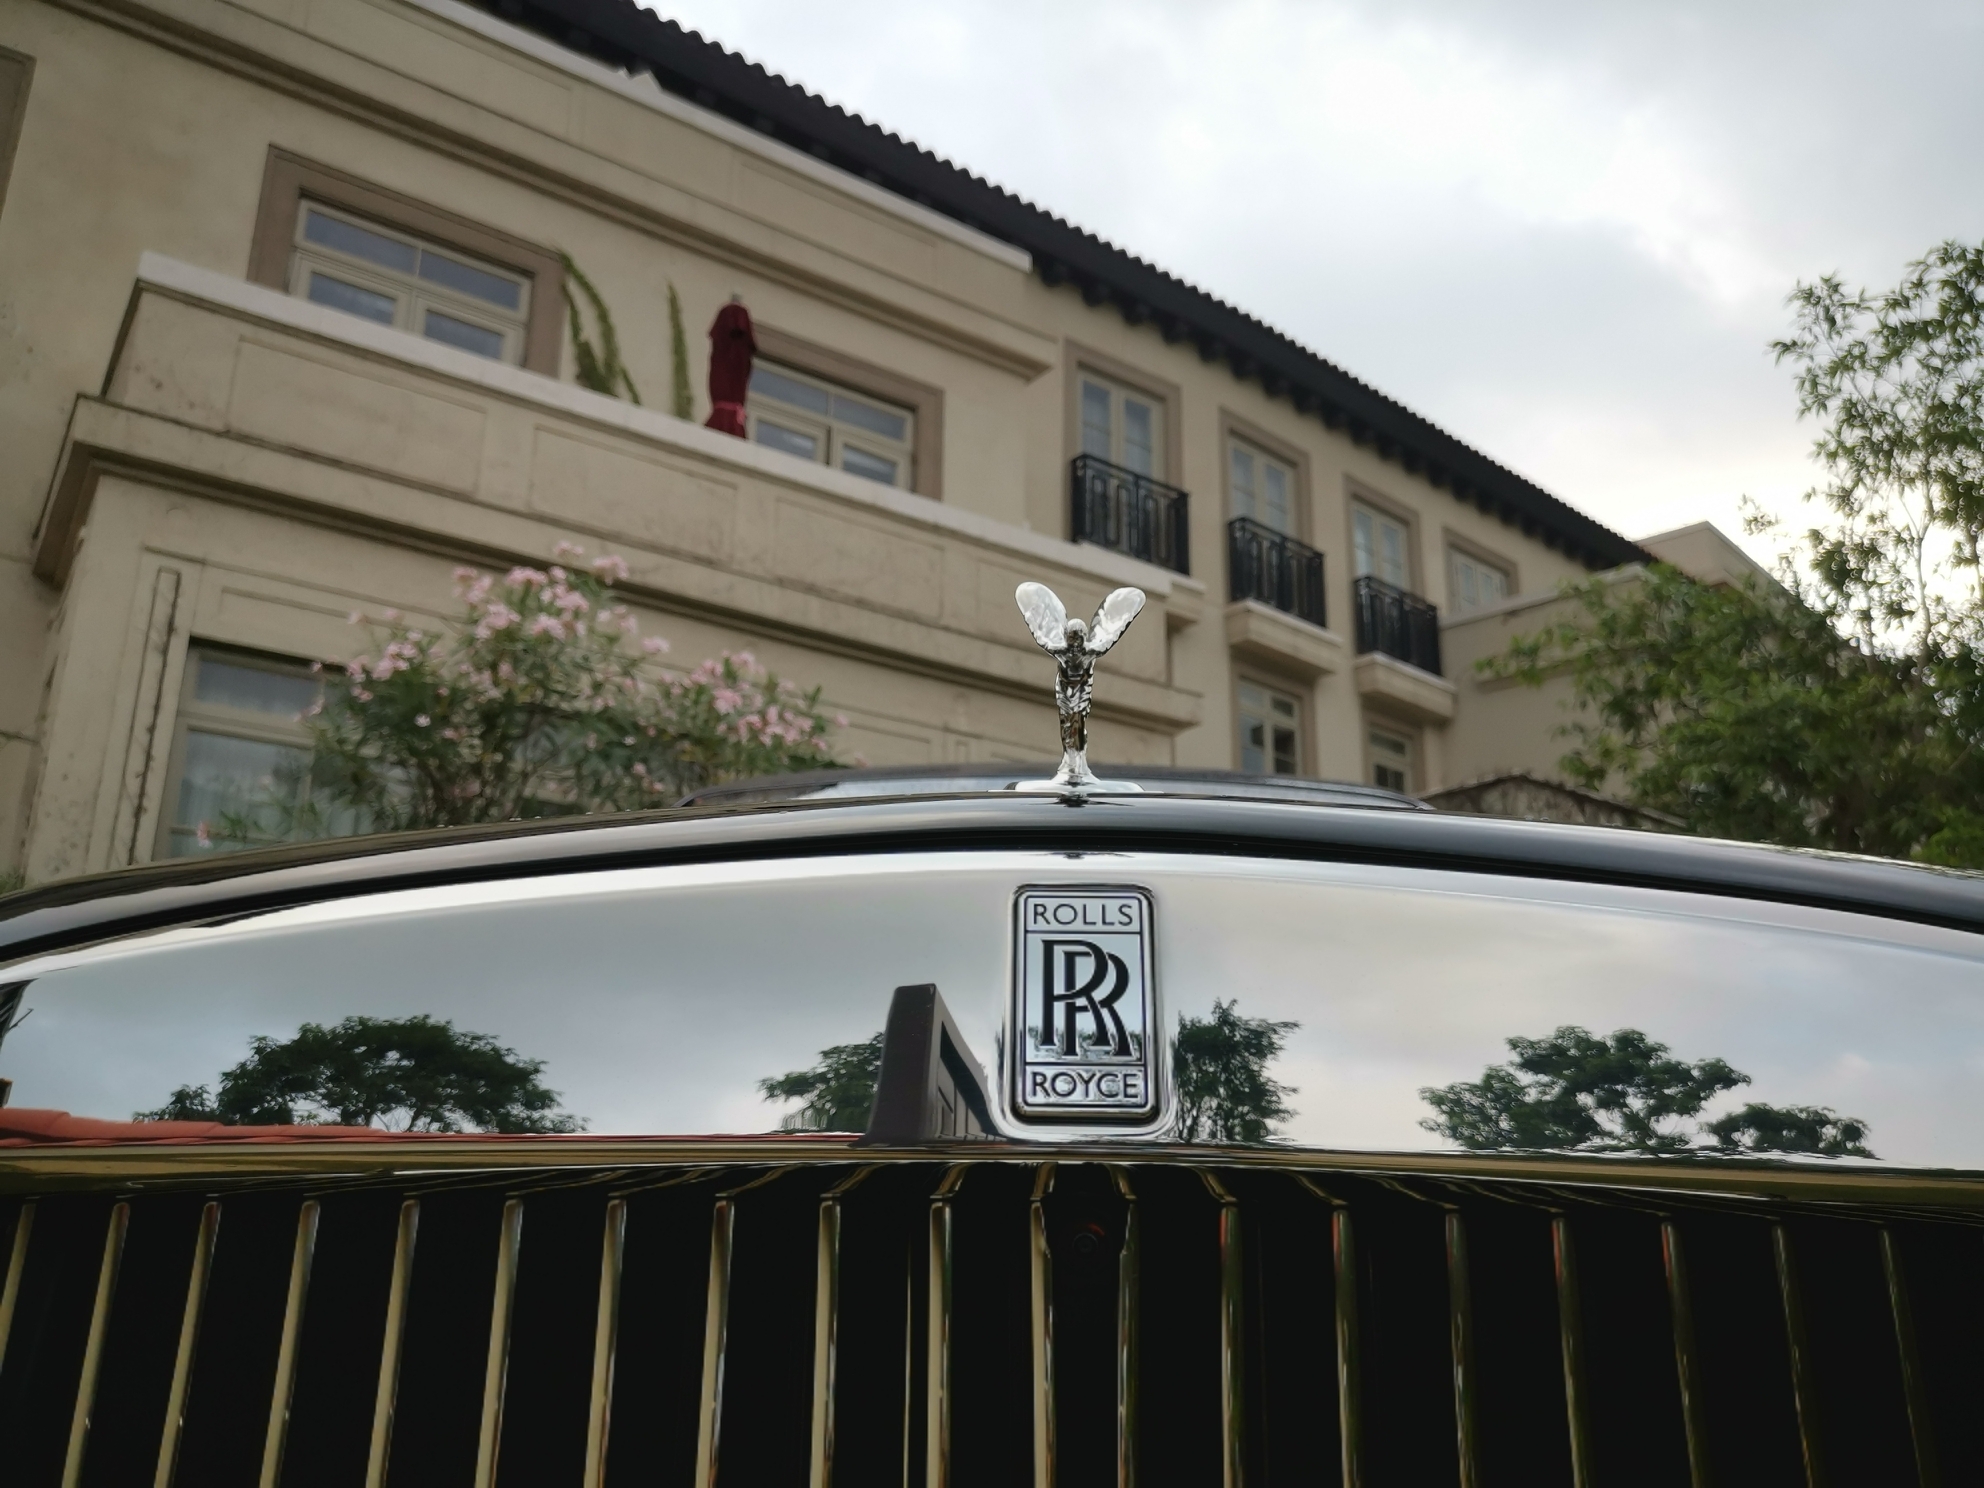 For centuries, Rolls-Royce has been a symbol of elegance and exclusiveness 